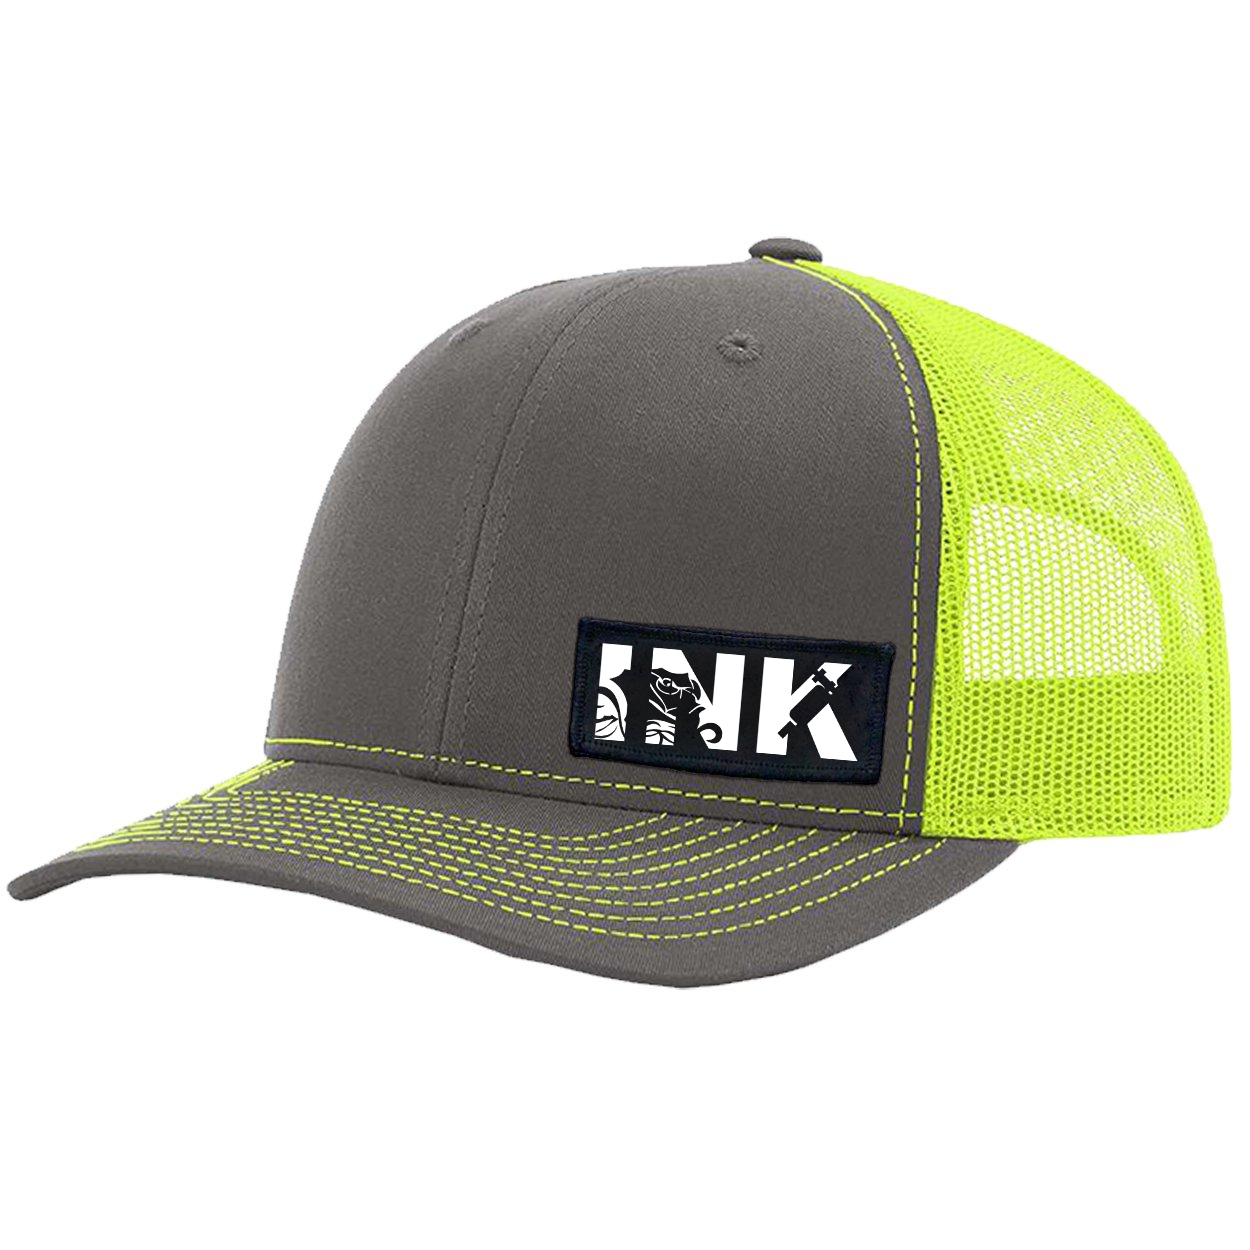 Ink Tattoo Logo Night Out Woven Patch Snapback Trucker Hat Charcoal/Neon Yellow (White Logo)